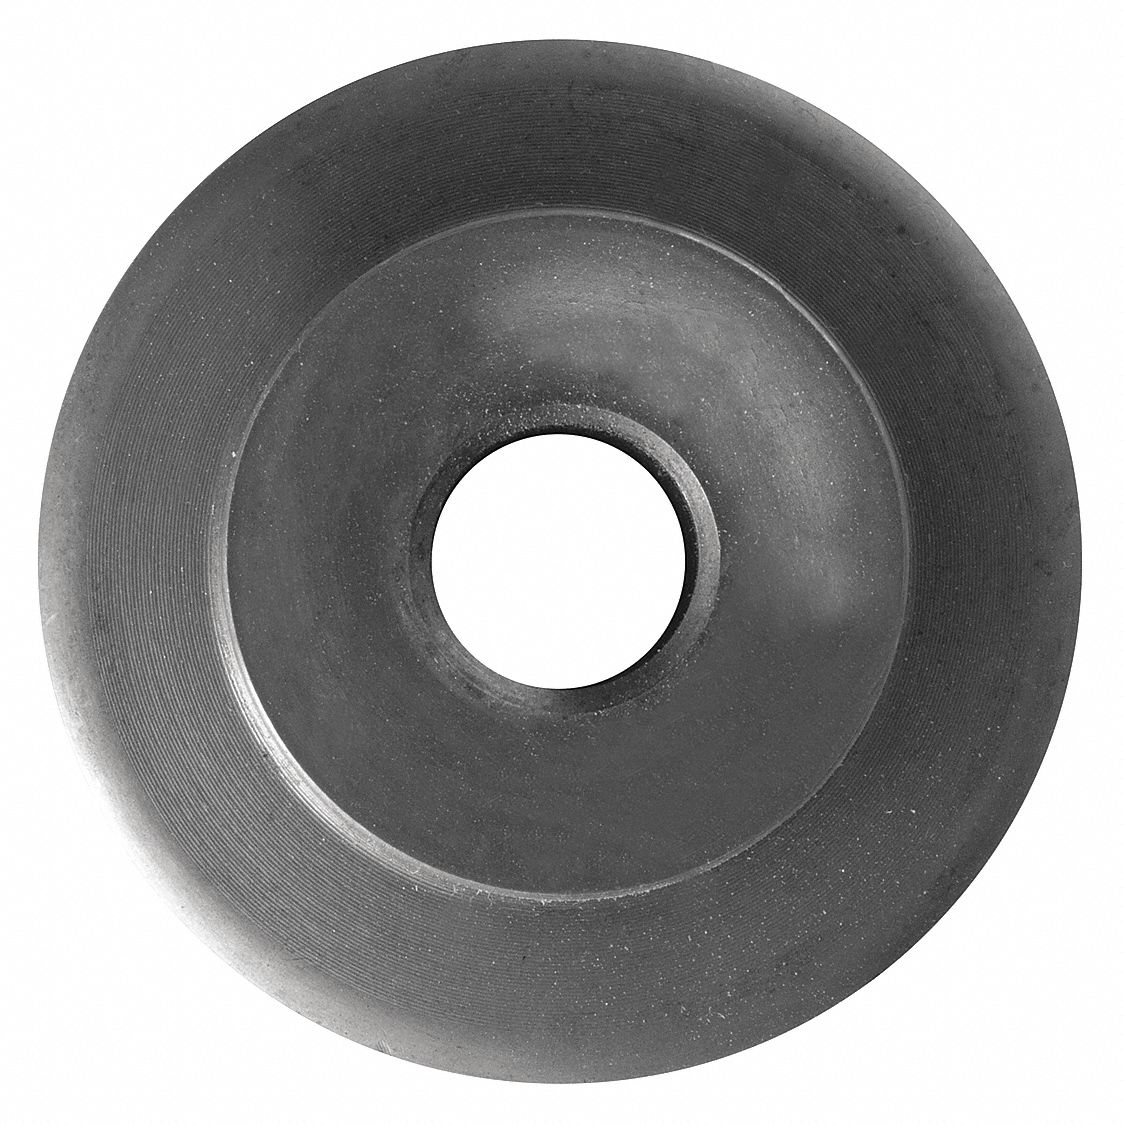 Replacement Cutter Wheel: Cuts Stainless Steel/Steel, For Grainger No. 38HV14, For Mfr No. H41